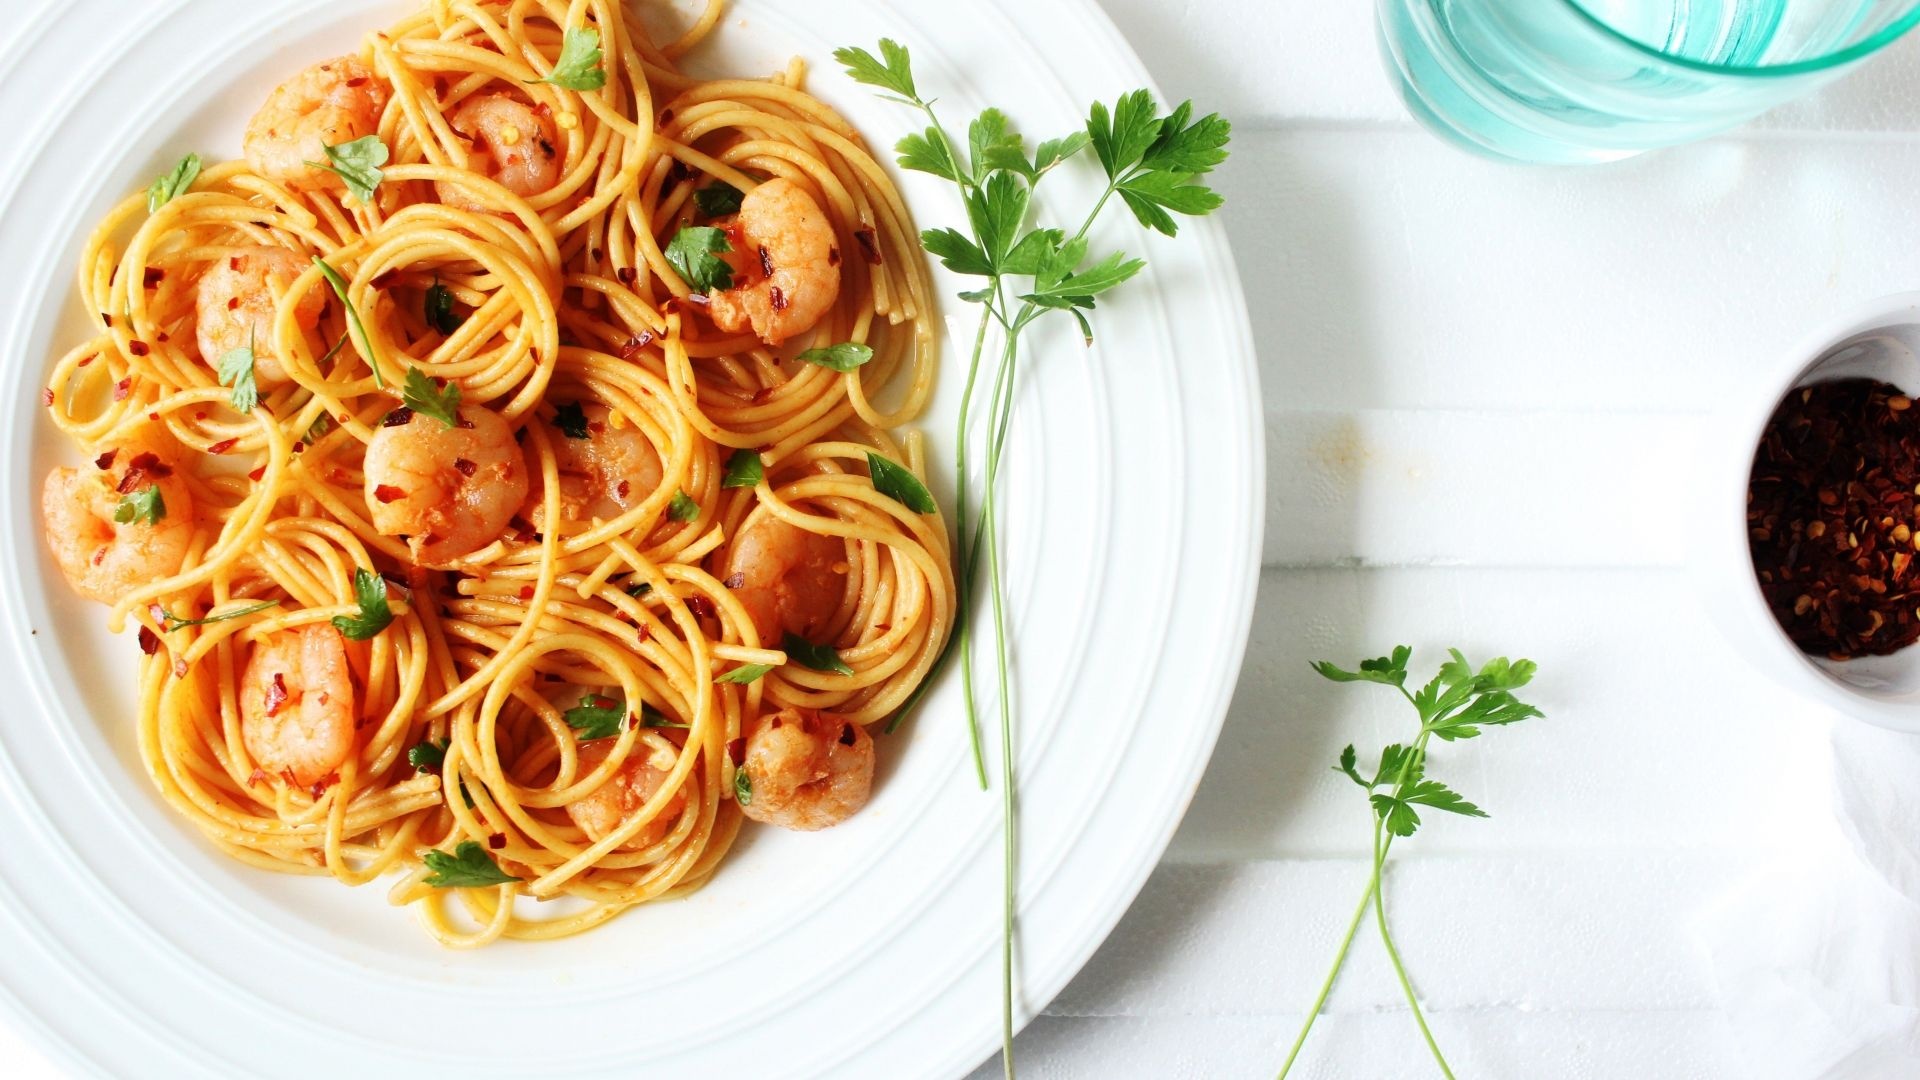 Pasta: Noodles, A popular comfort food, Associated with family gatherings. 1920x1080 Full HD Wallpaper.